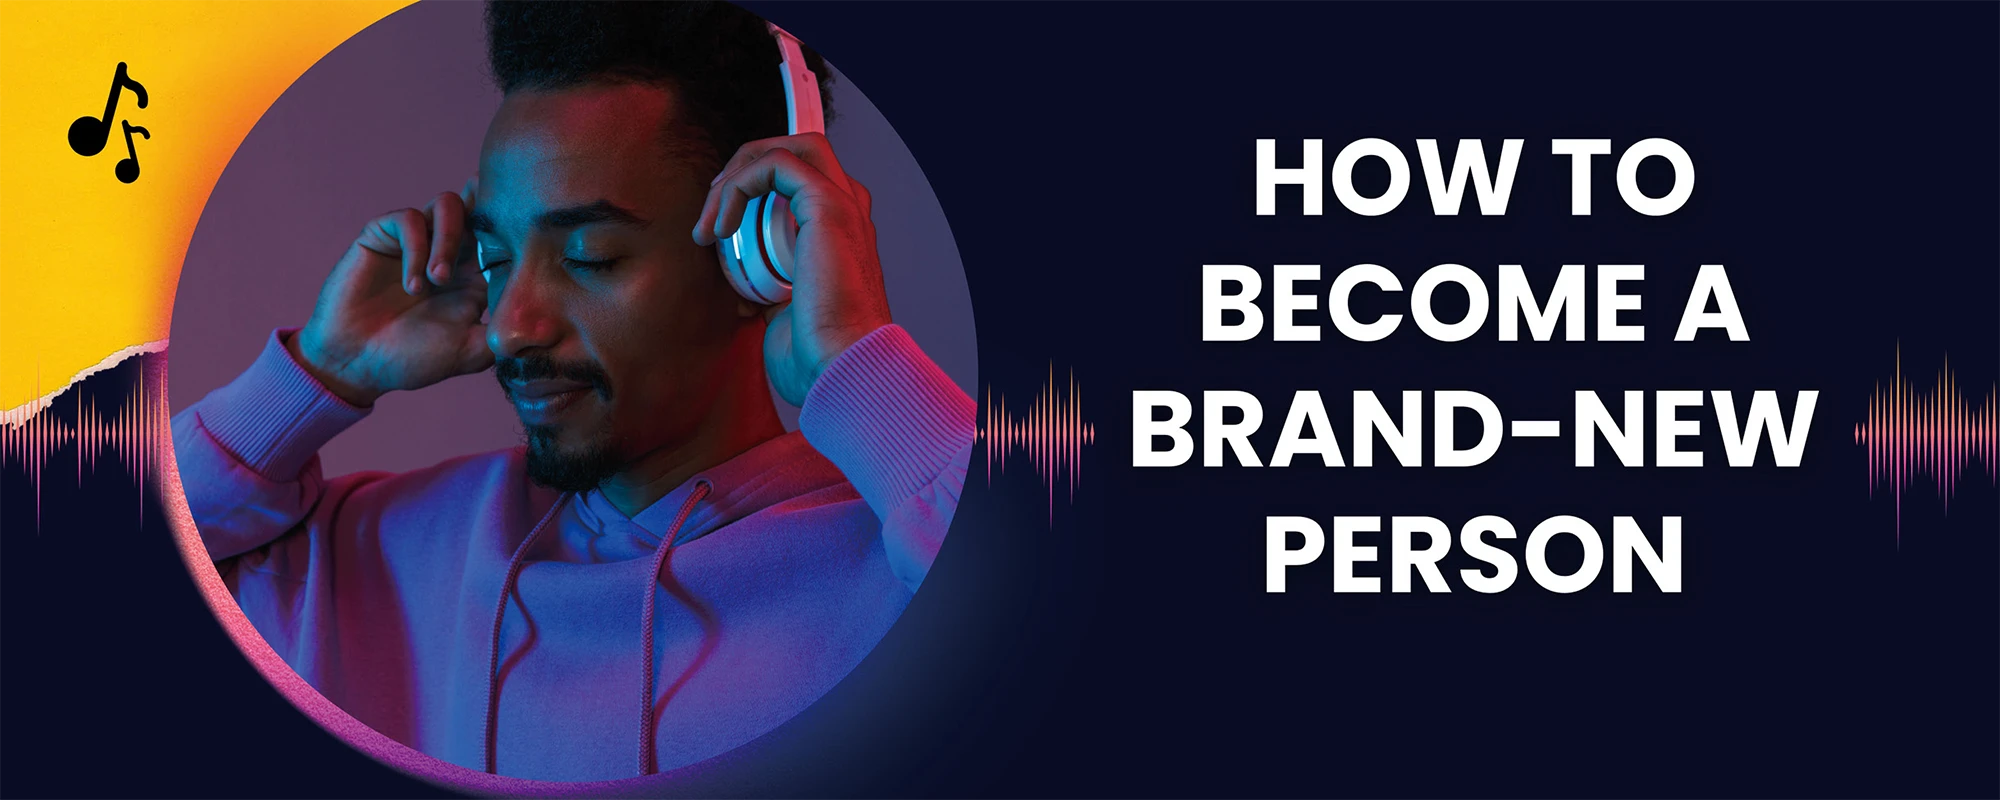 How To Become A Brand-New Person